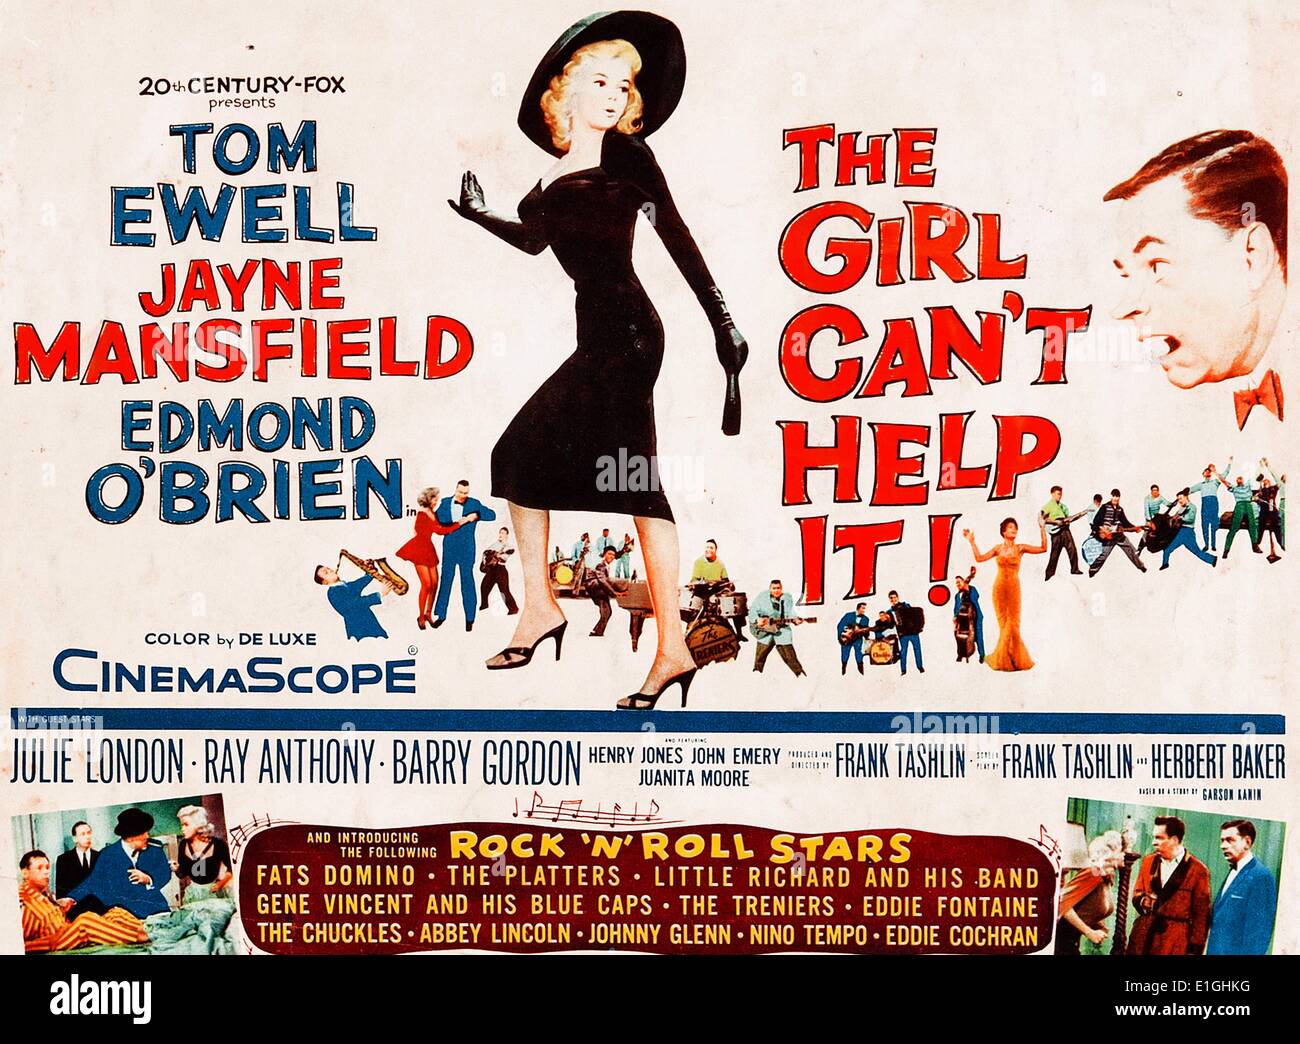 The Girl Can't Help It a 1956 musical comedy starring Jayne Mansfield, Tom Ewell, Edmond O'Brien, Henry Jones and Julie London. Stock Photo